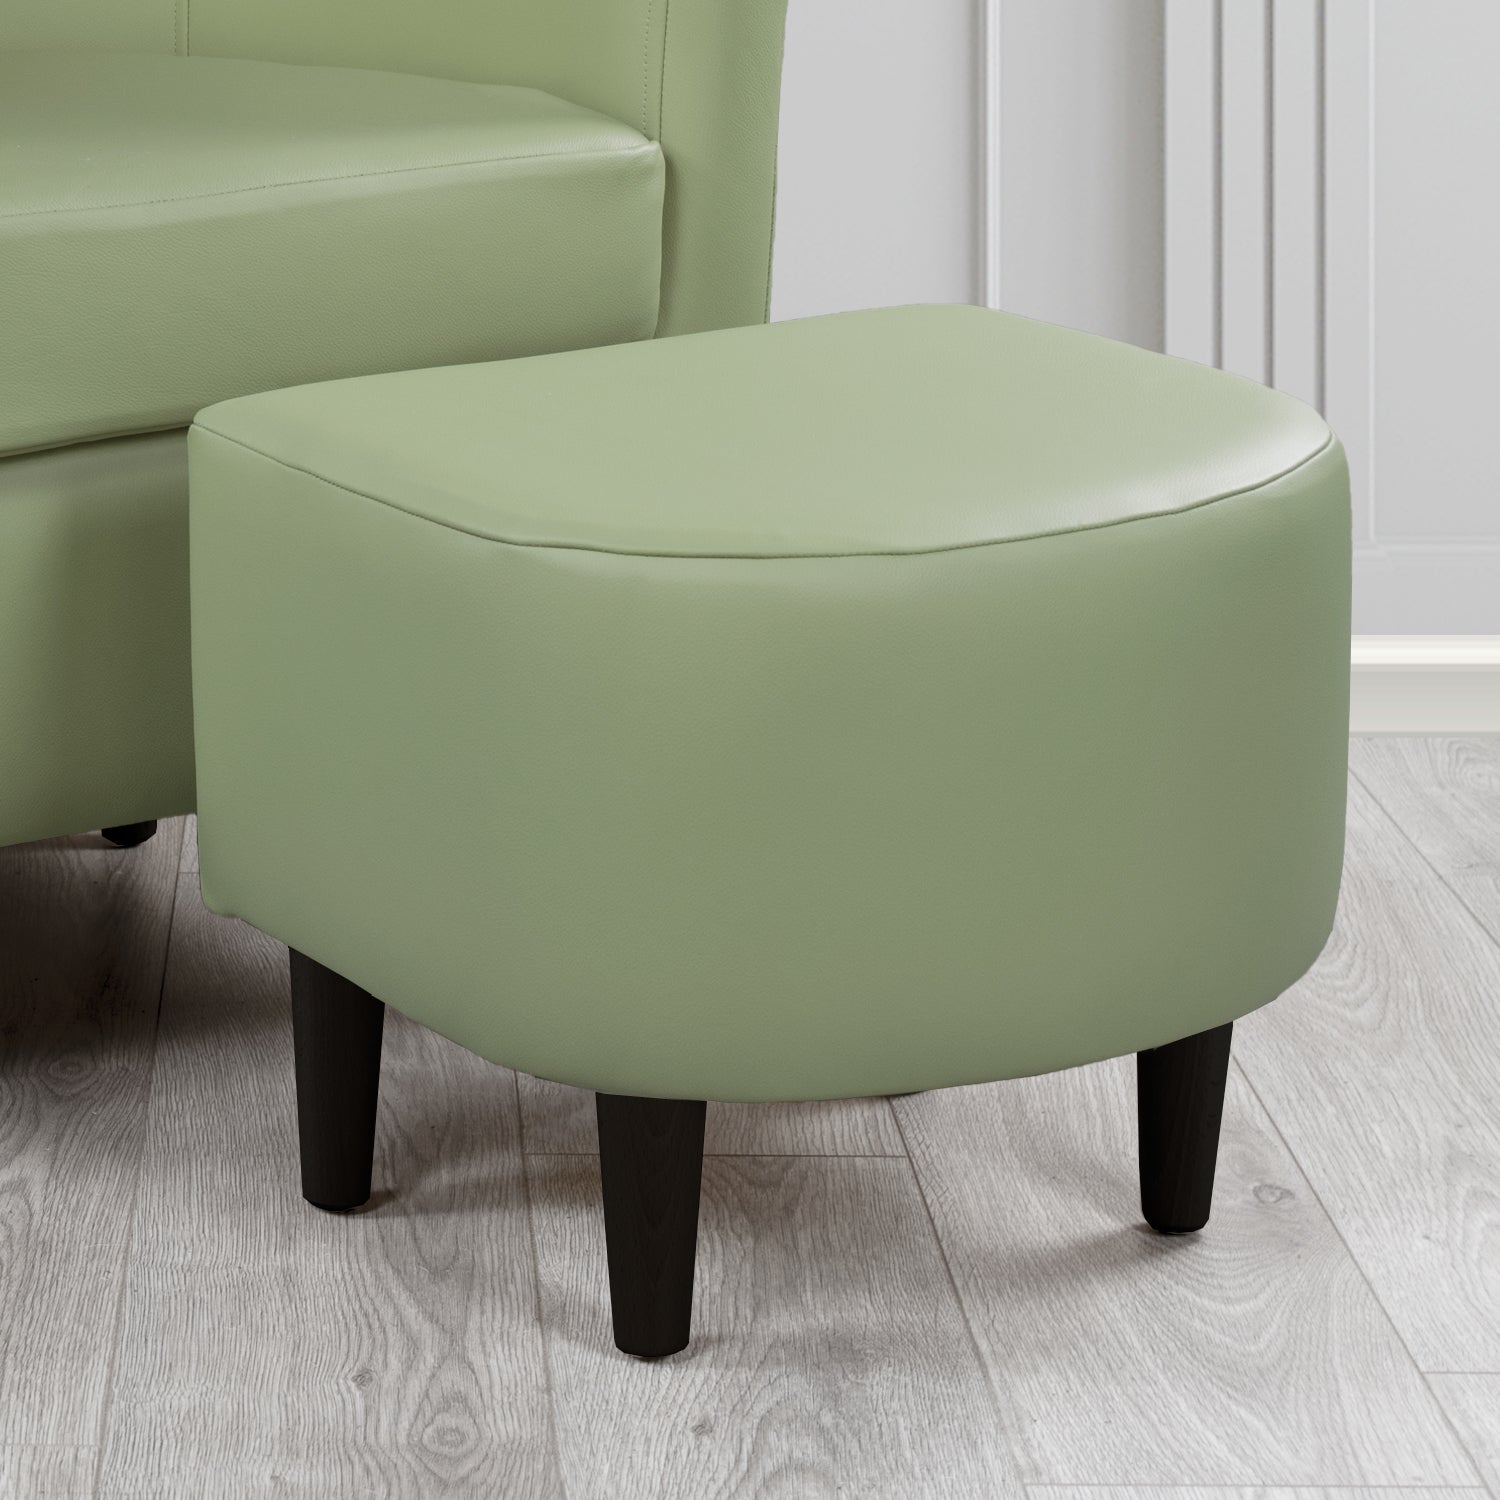 St Tropez Shelly Thyme Green Crib 5 Genuine Leather Footstool (4631438098474)